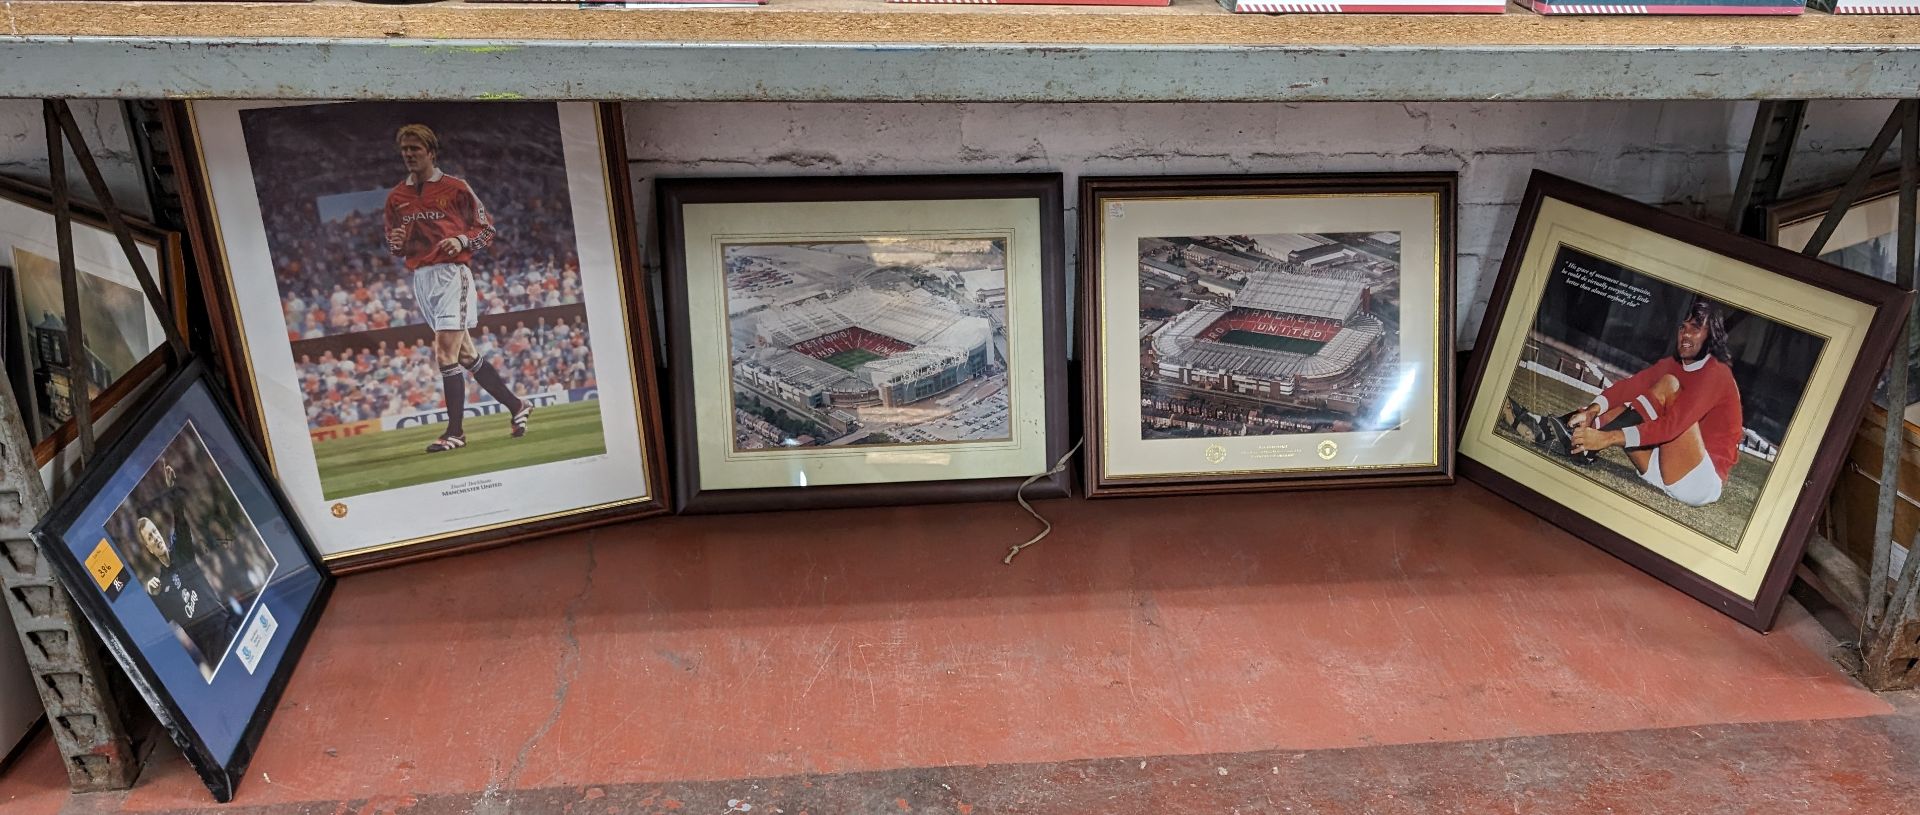 5 off football related framed photos, comprising 4 photographs relating to Manchester Utd & 1 relati - Image 2 of 11